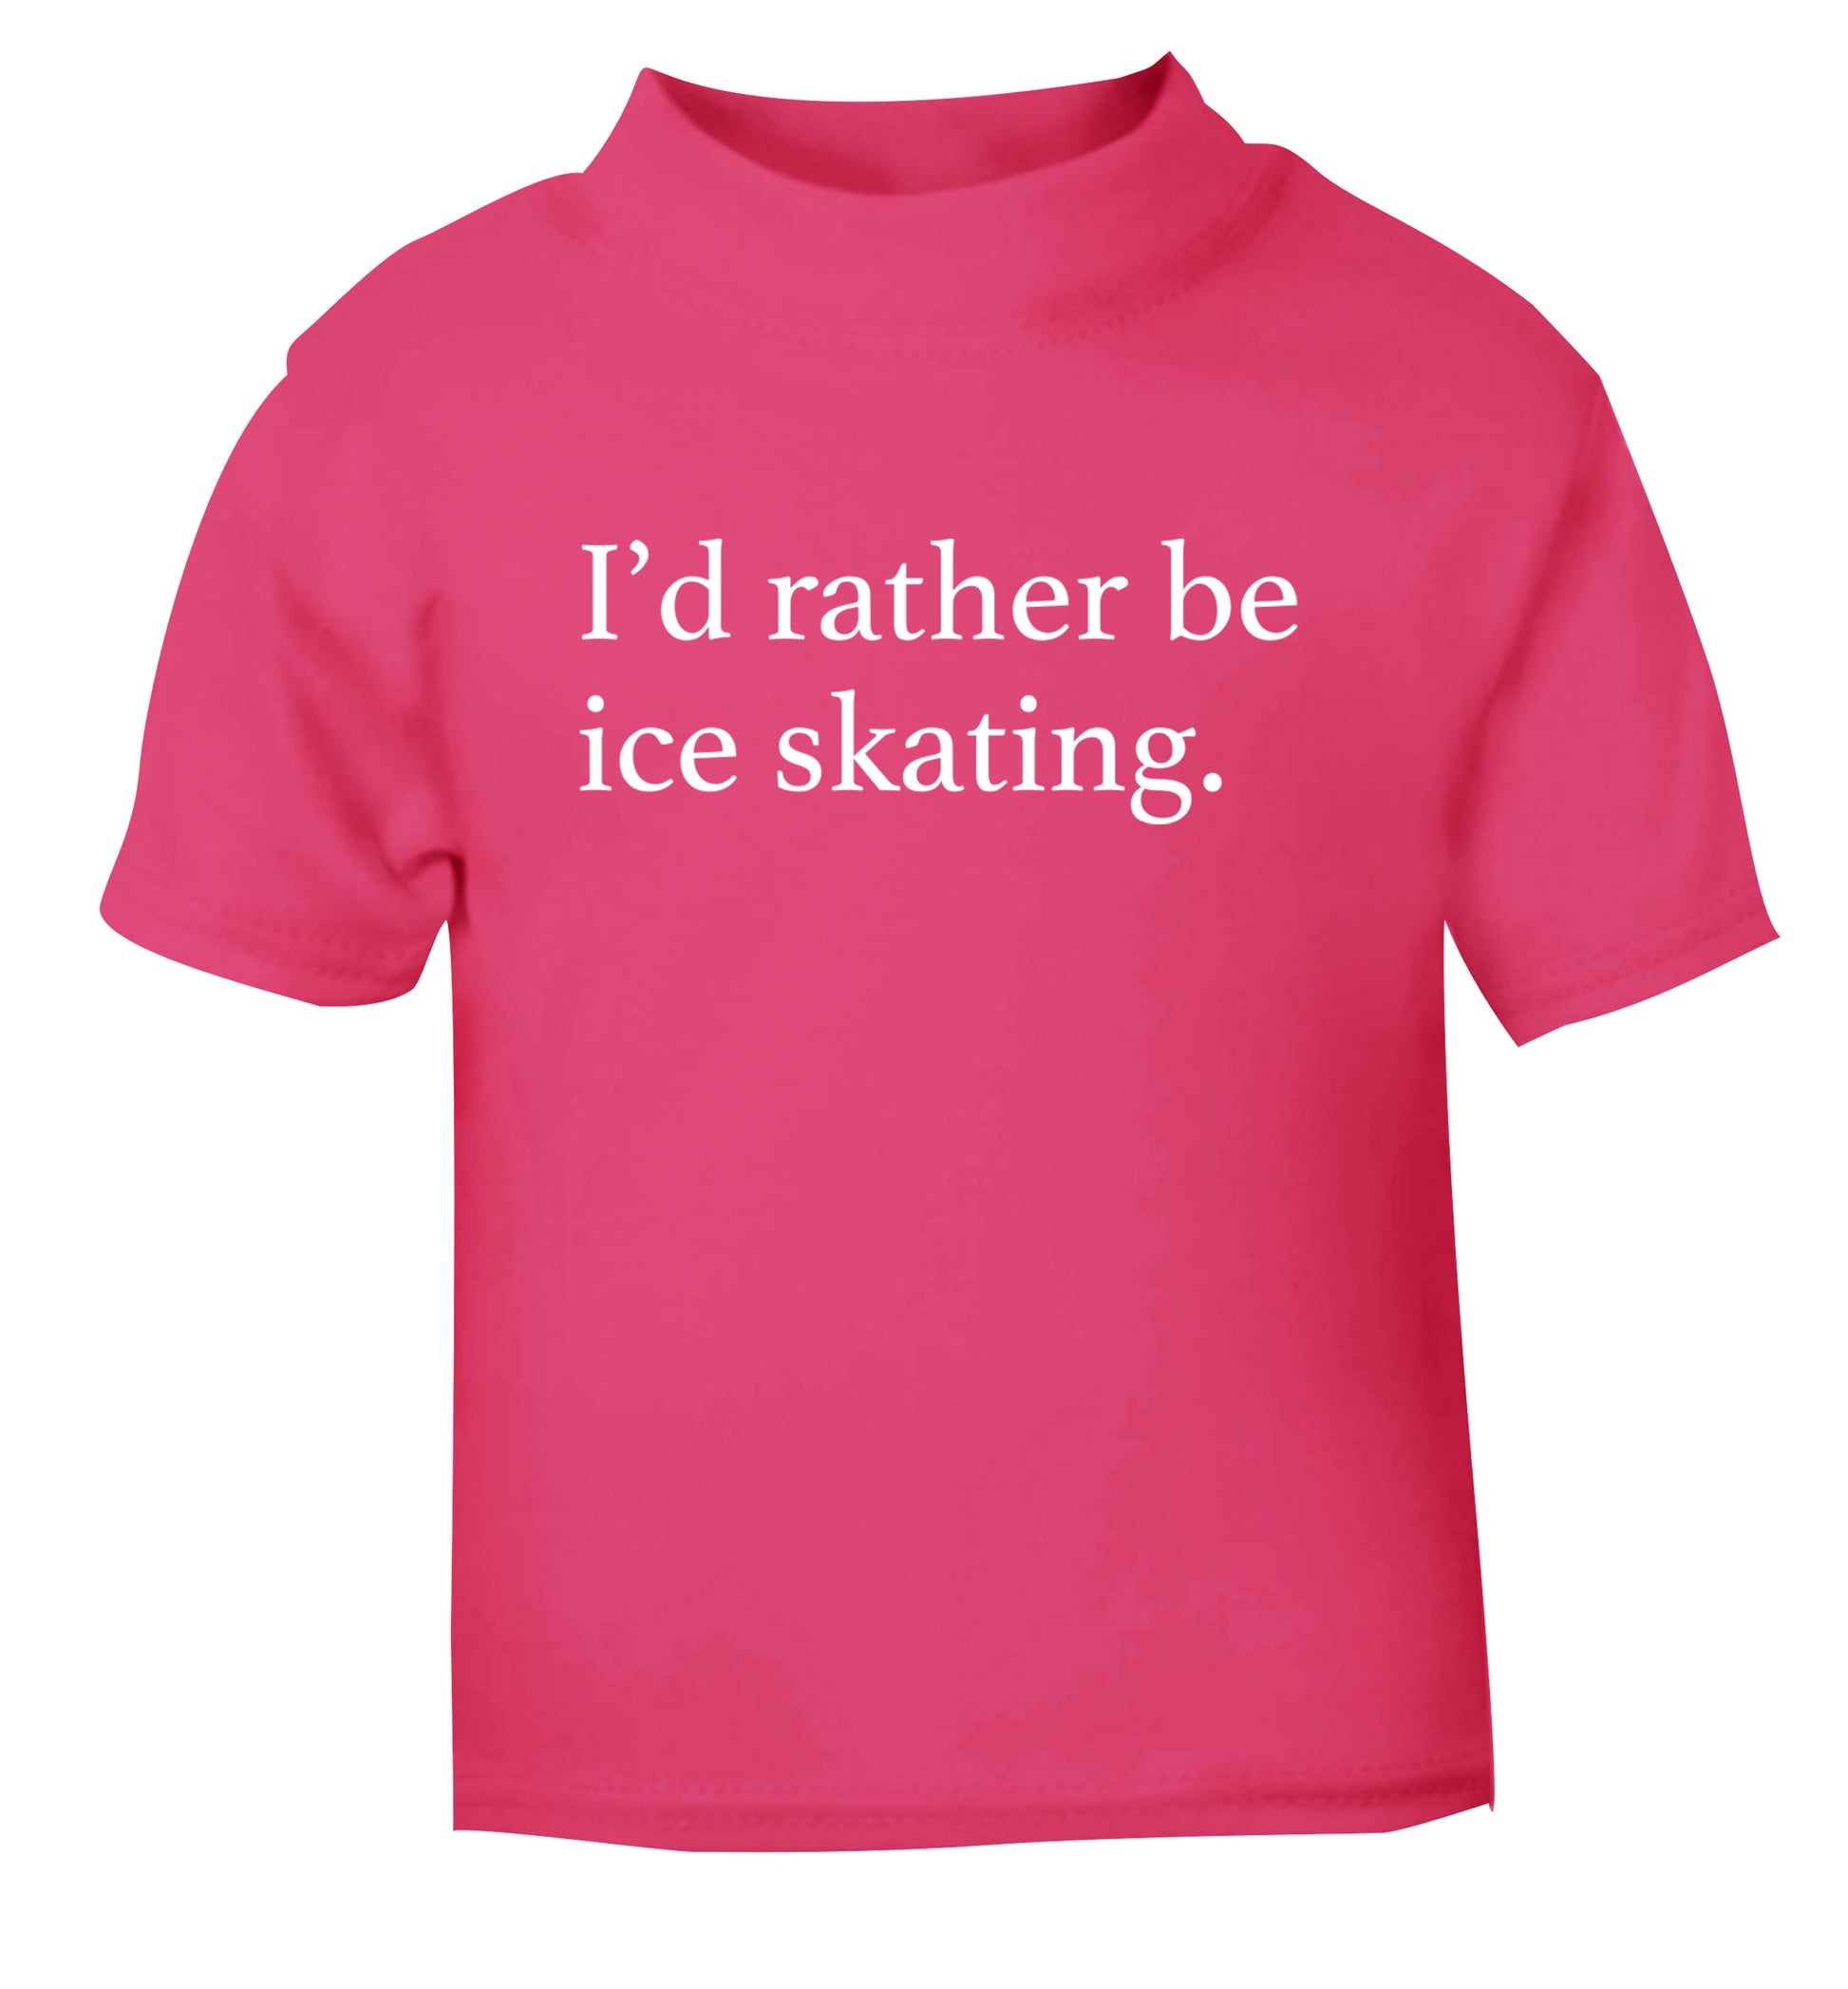 I'd rather be ice skating pink Baby Toddler Tshirt 2 Years